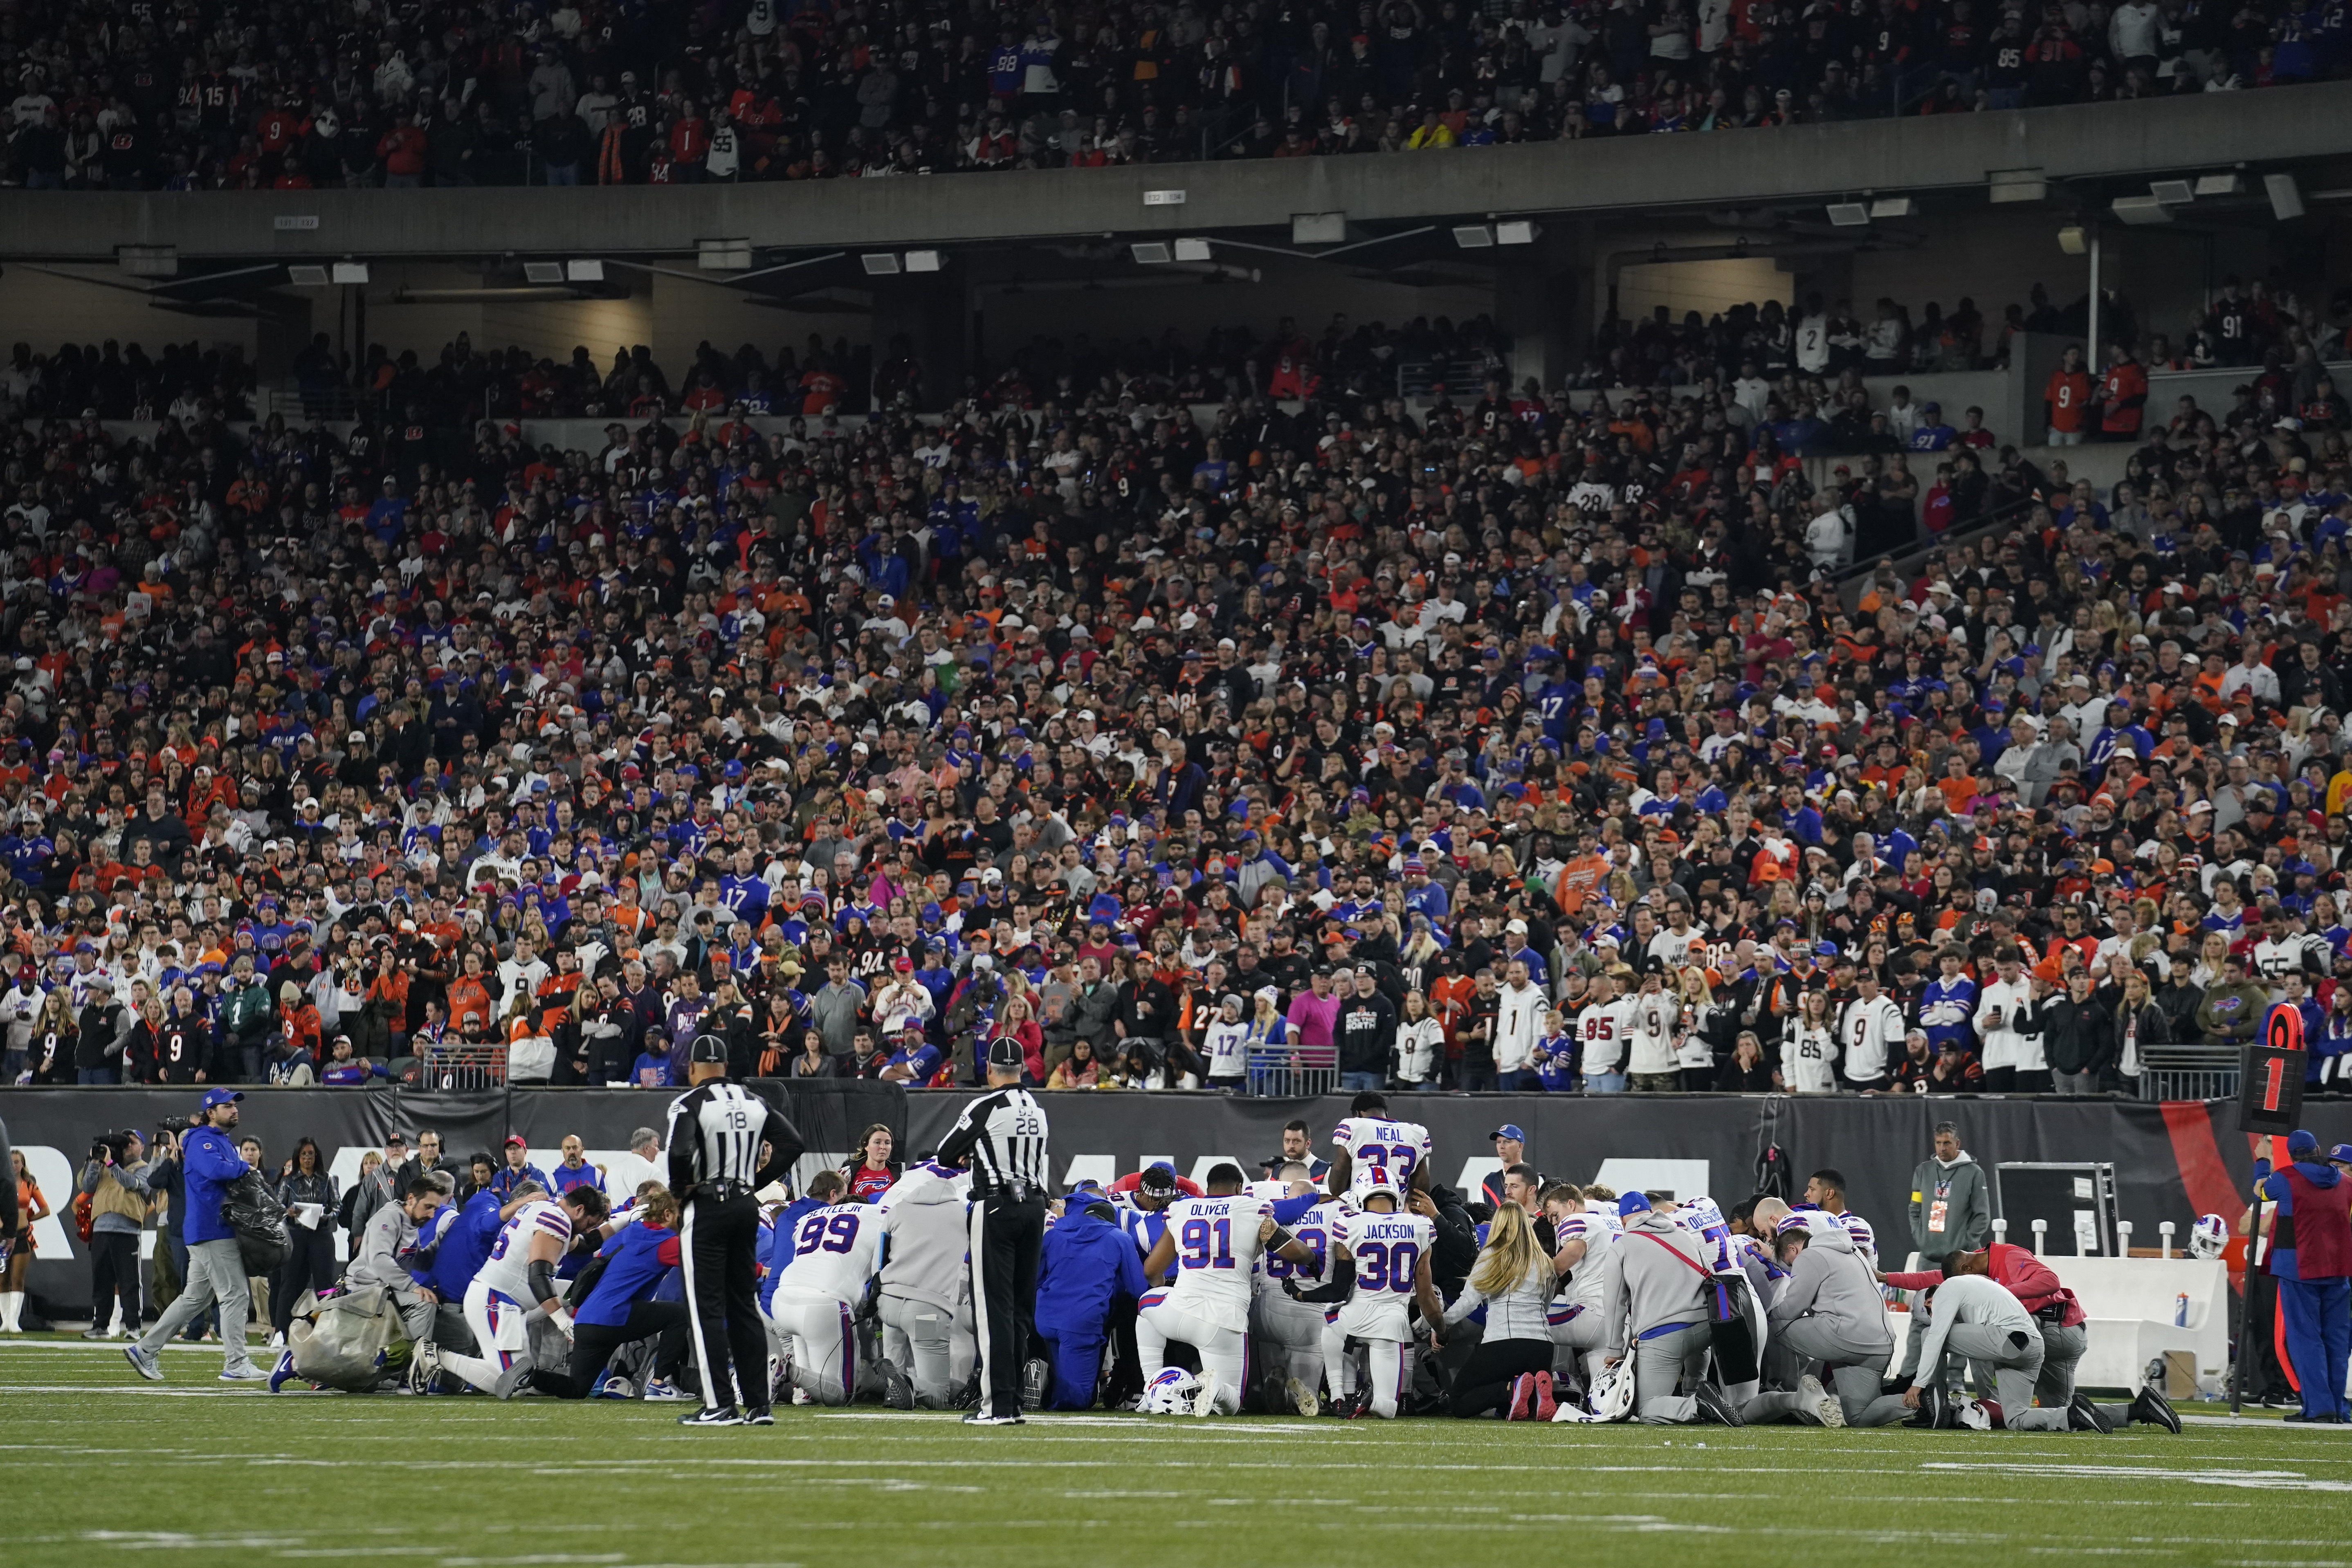 Buffalo after '13 seconds': How fans will weather latest loss